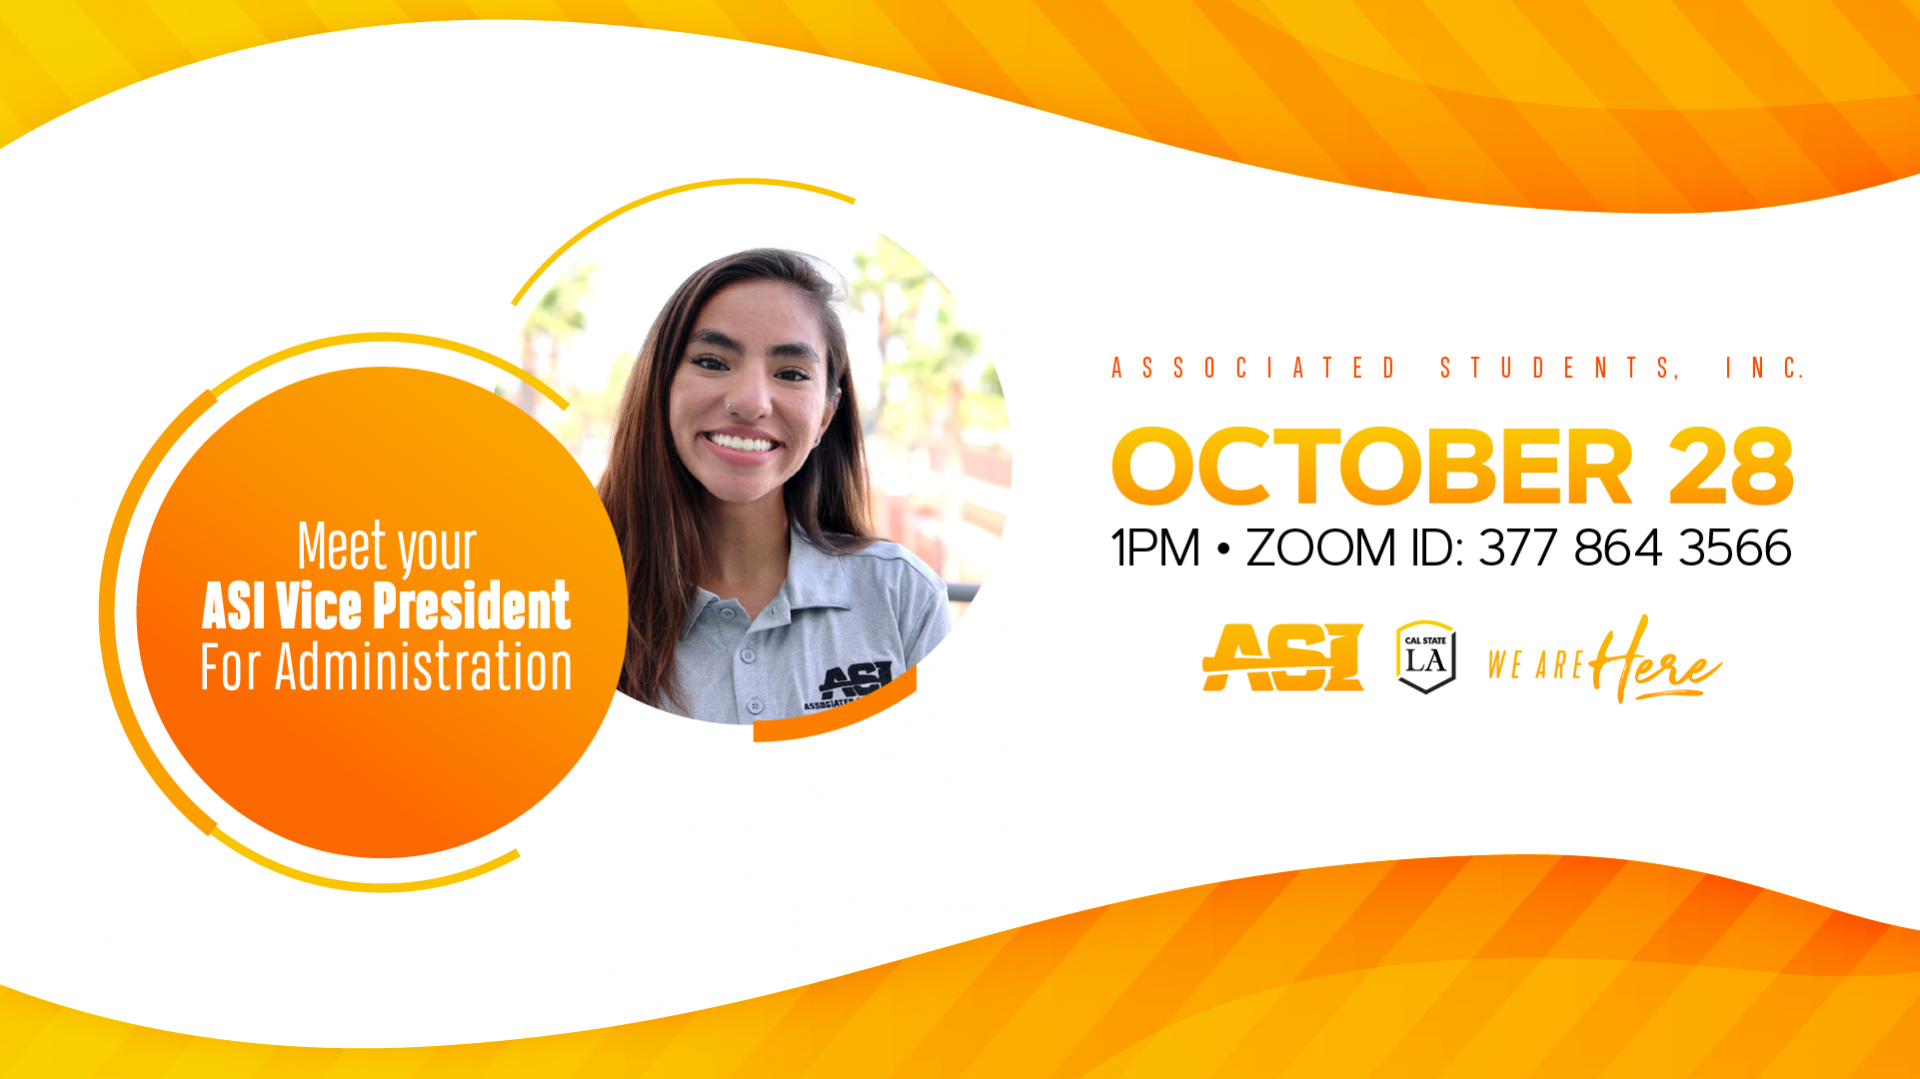 Meet your ASI Vice President for Administration